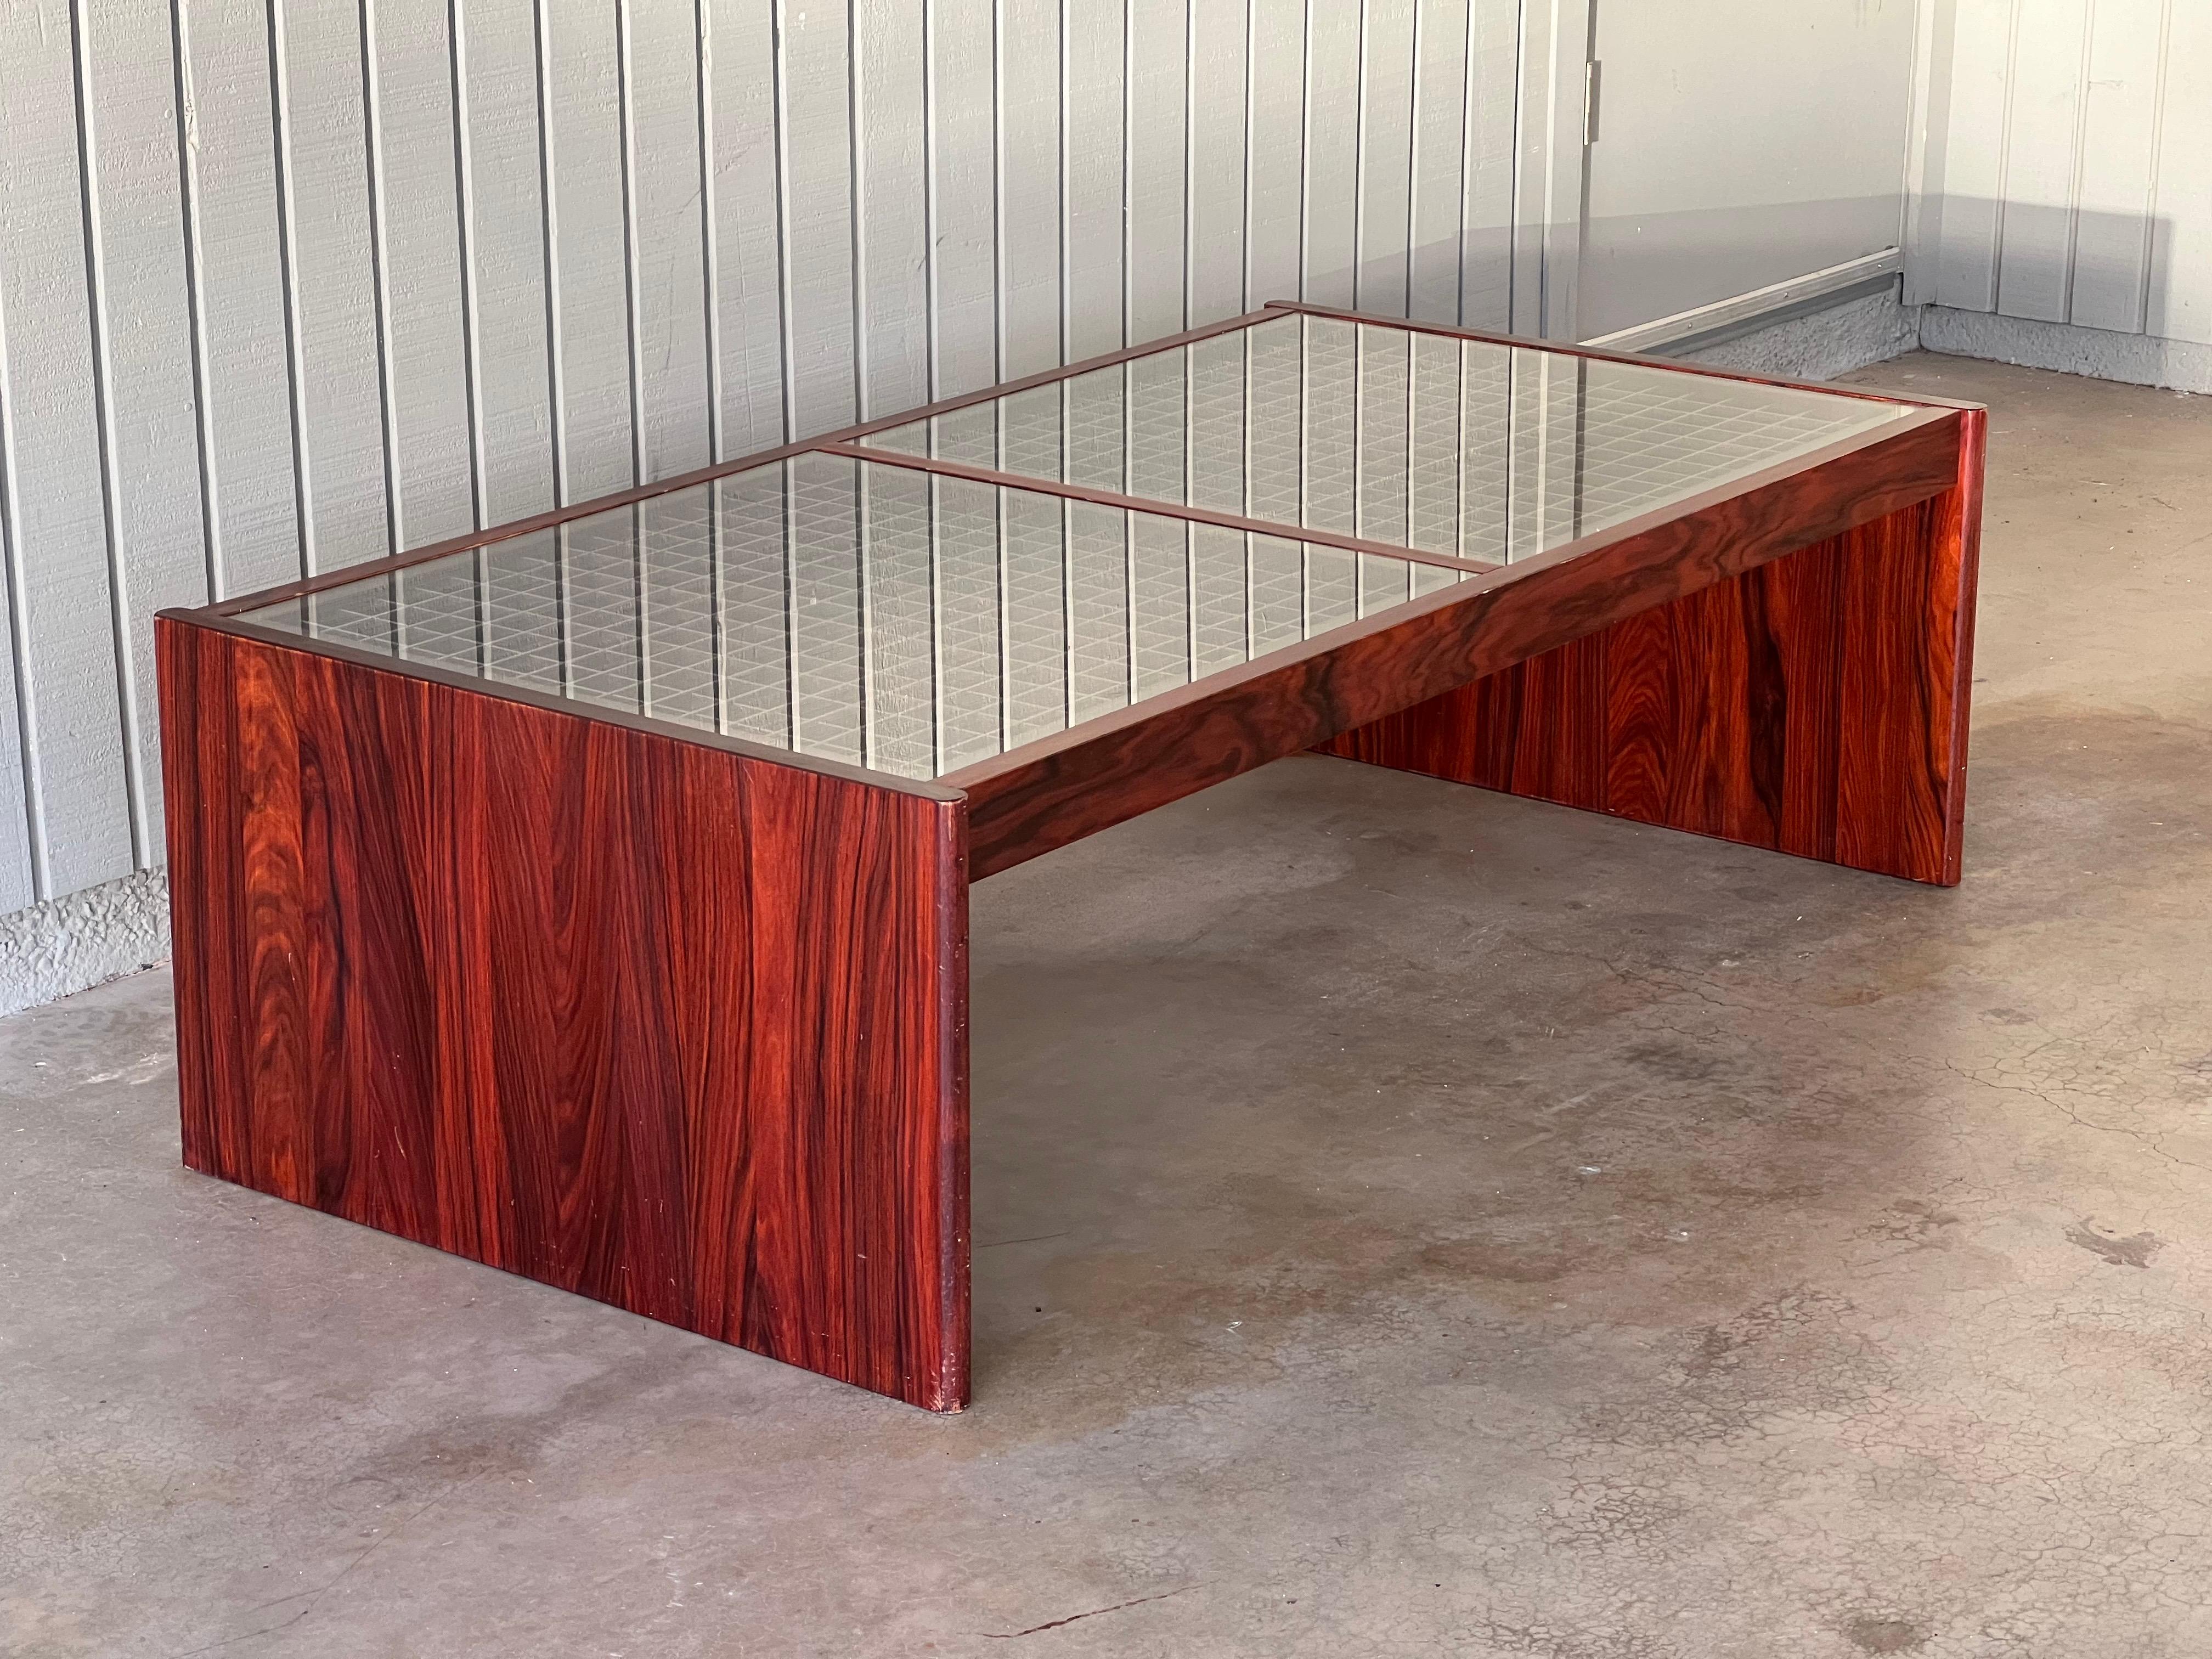 Danish rosewood and glass coffee table by Komfort, likely 1970s. Two pieces of glass cover a wood grid or lattice pattern. Labeled Made in Denmark. The rosewood has some amazing contrasting grain. It is very sturdy, a truly stunning piece. 55.5”